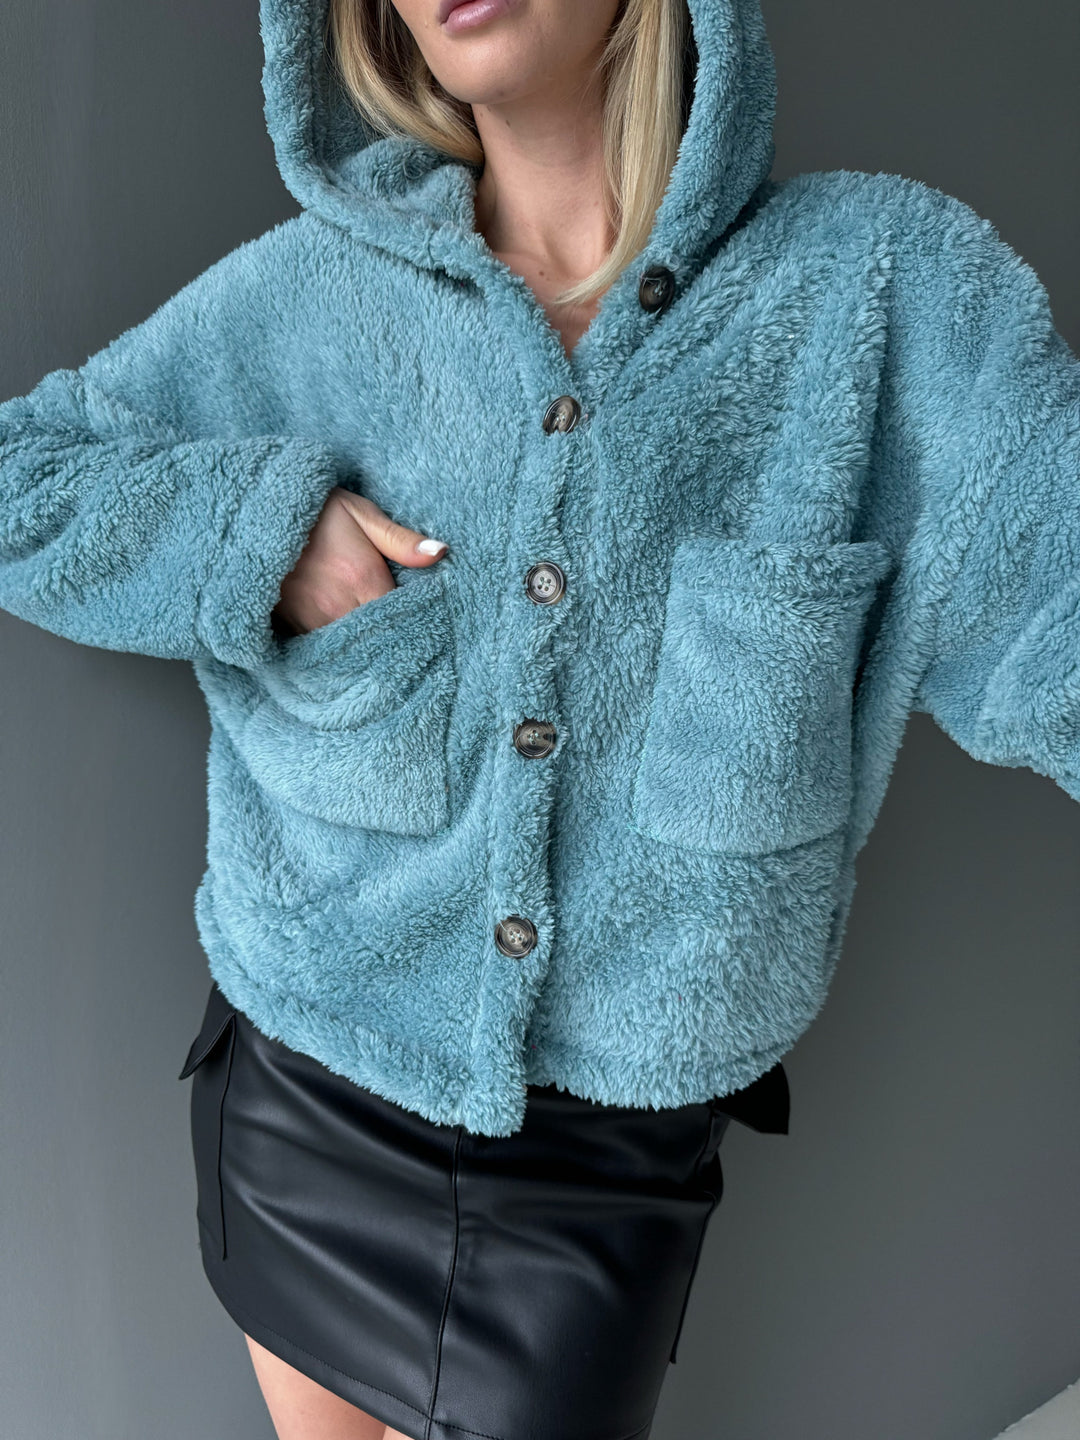 Plush Jacket with Buttons - Mint